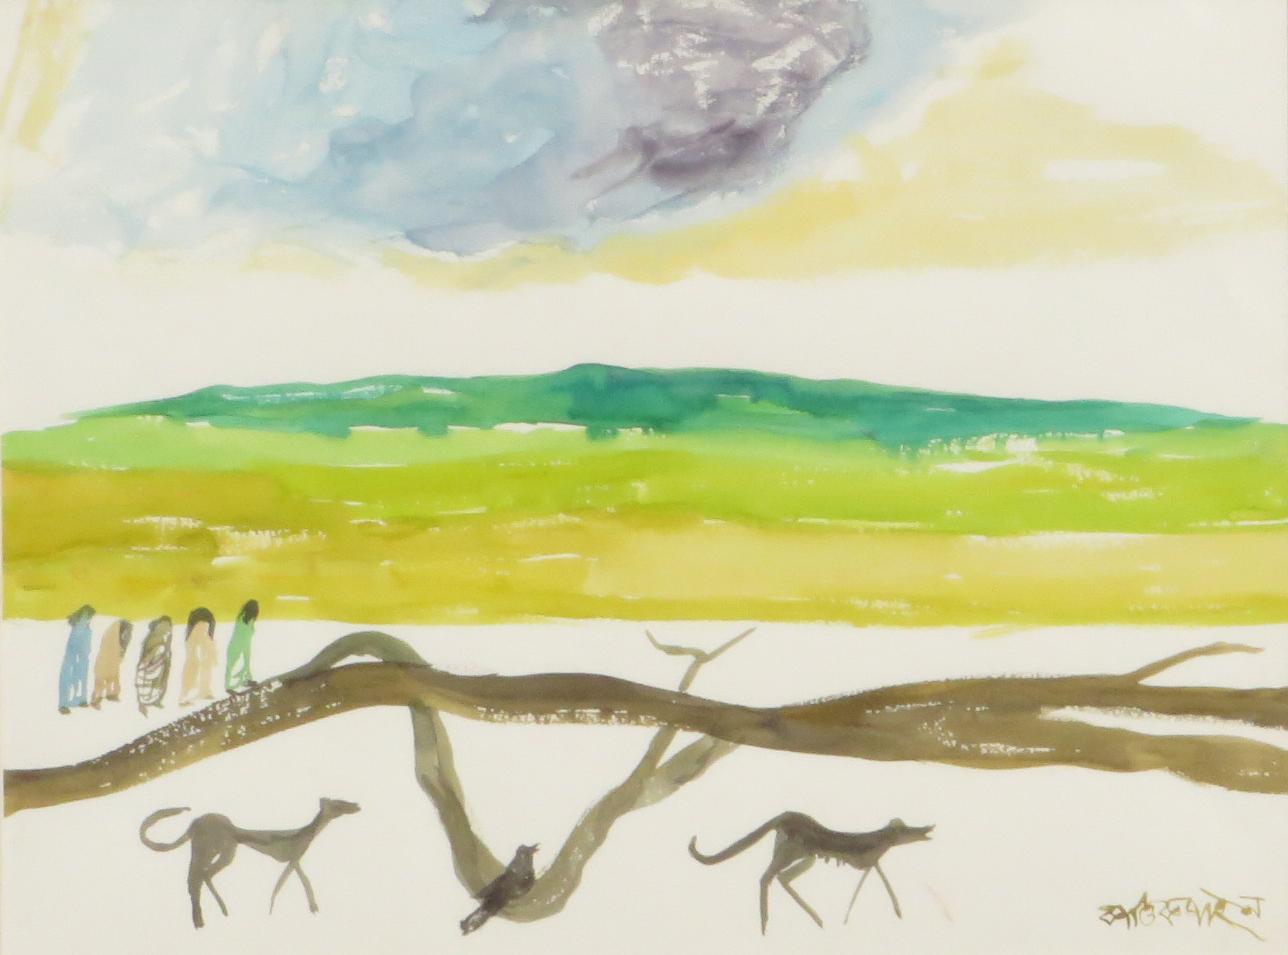 My Village, Landscape, Watercolor on Paper, Blue, Green, Brown, Yellow